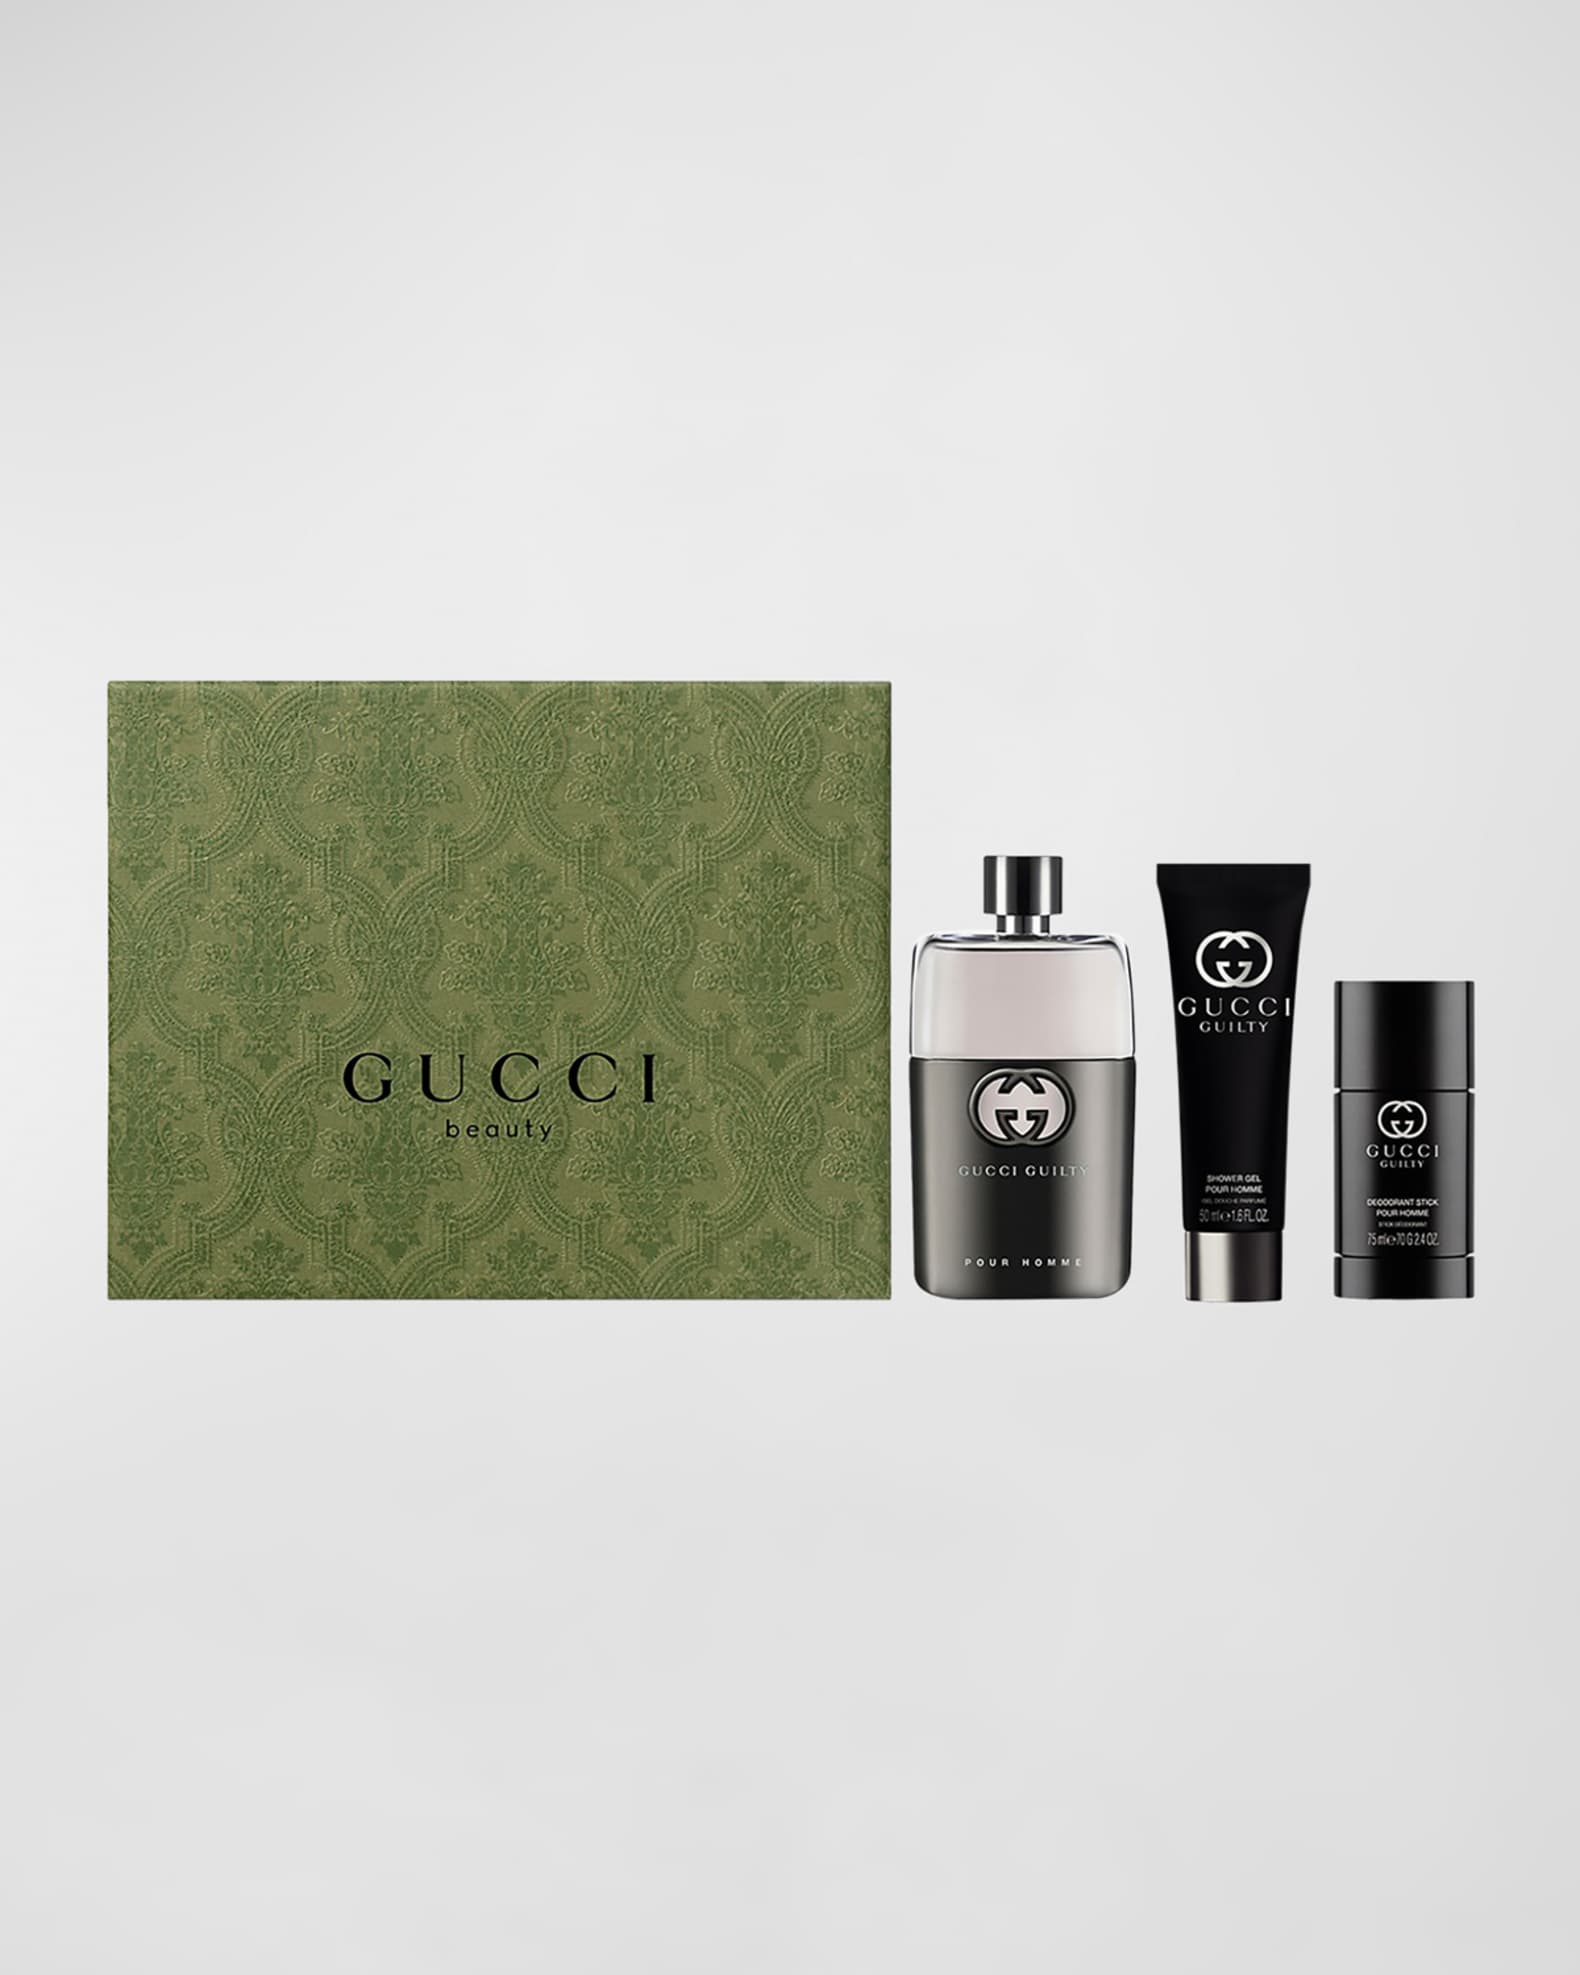 Gucci Prada Versace Jimmy Choo Chanel - Business Owner - Self Owned  Business